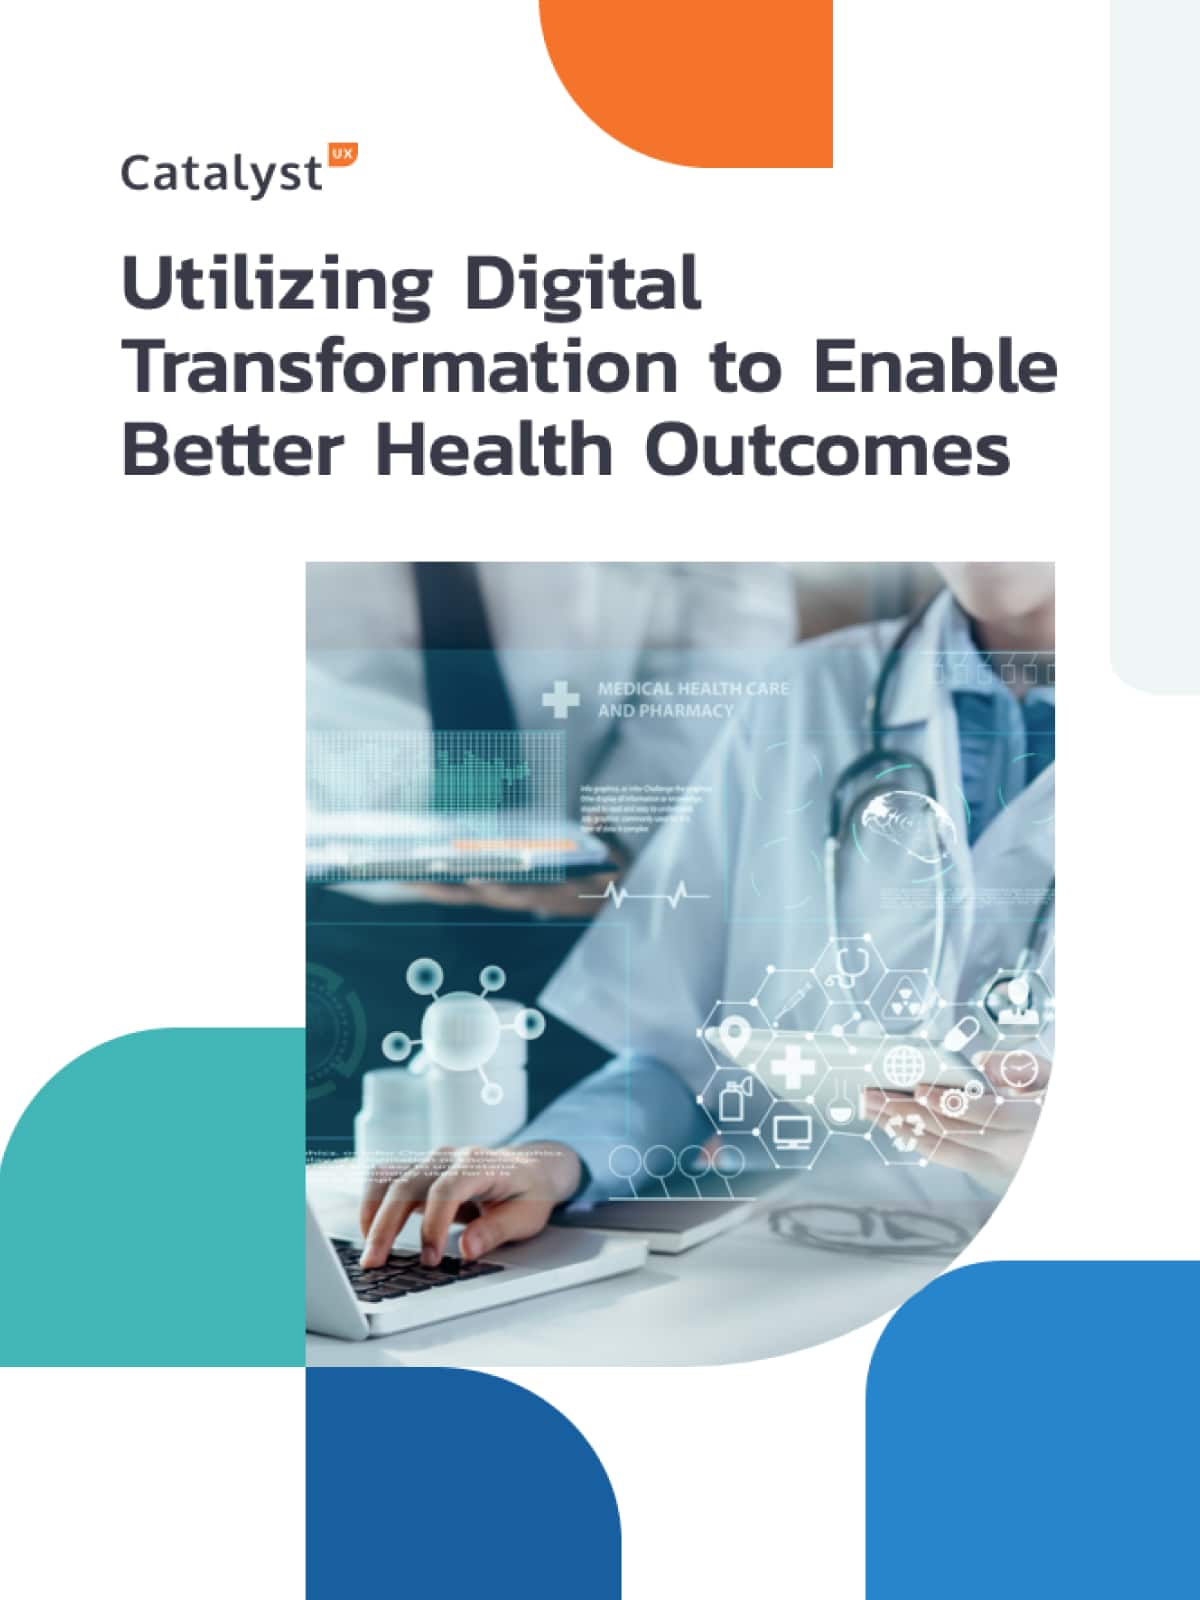 Using Digital Transformation to Enable Better Health Outcomes